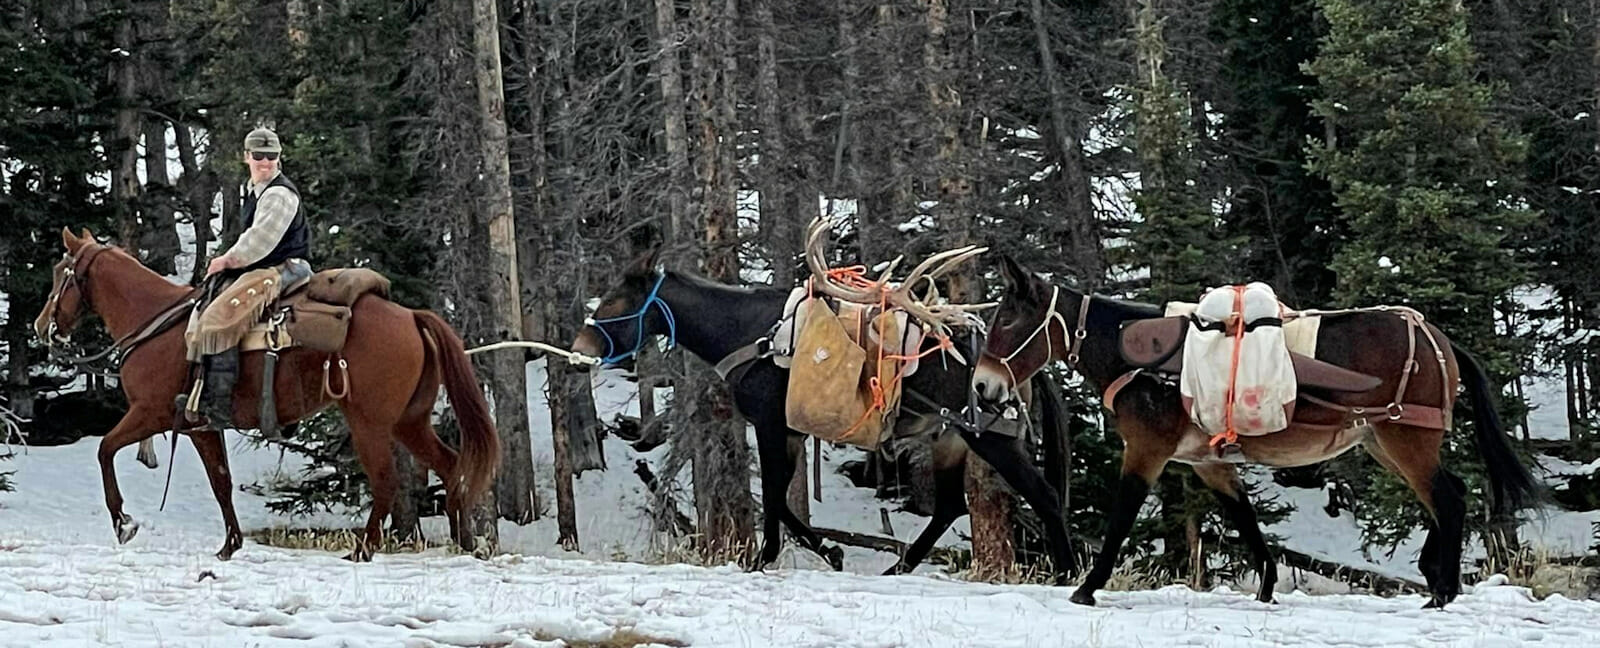 Packing out a hunters elk on horse back.